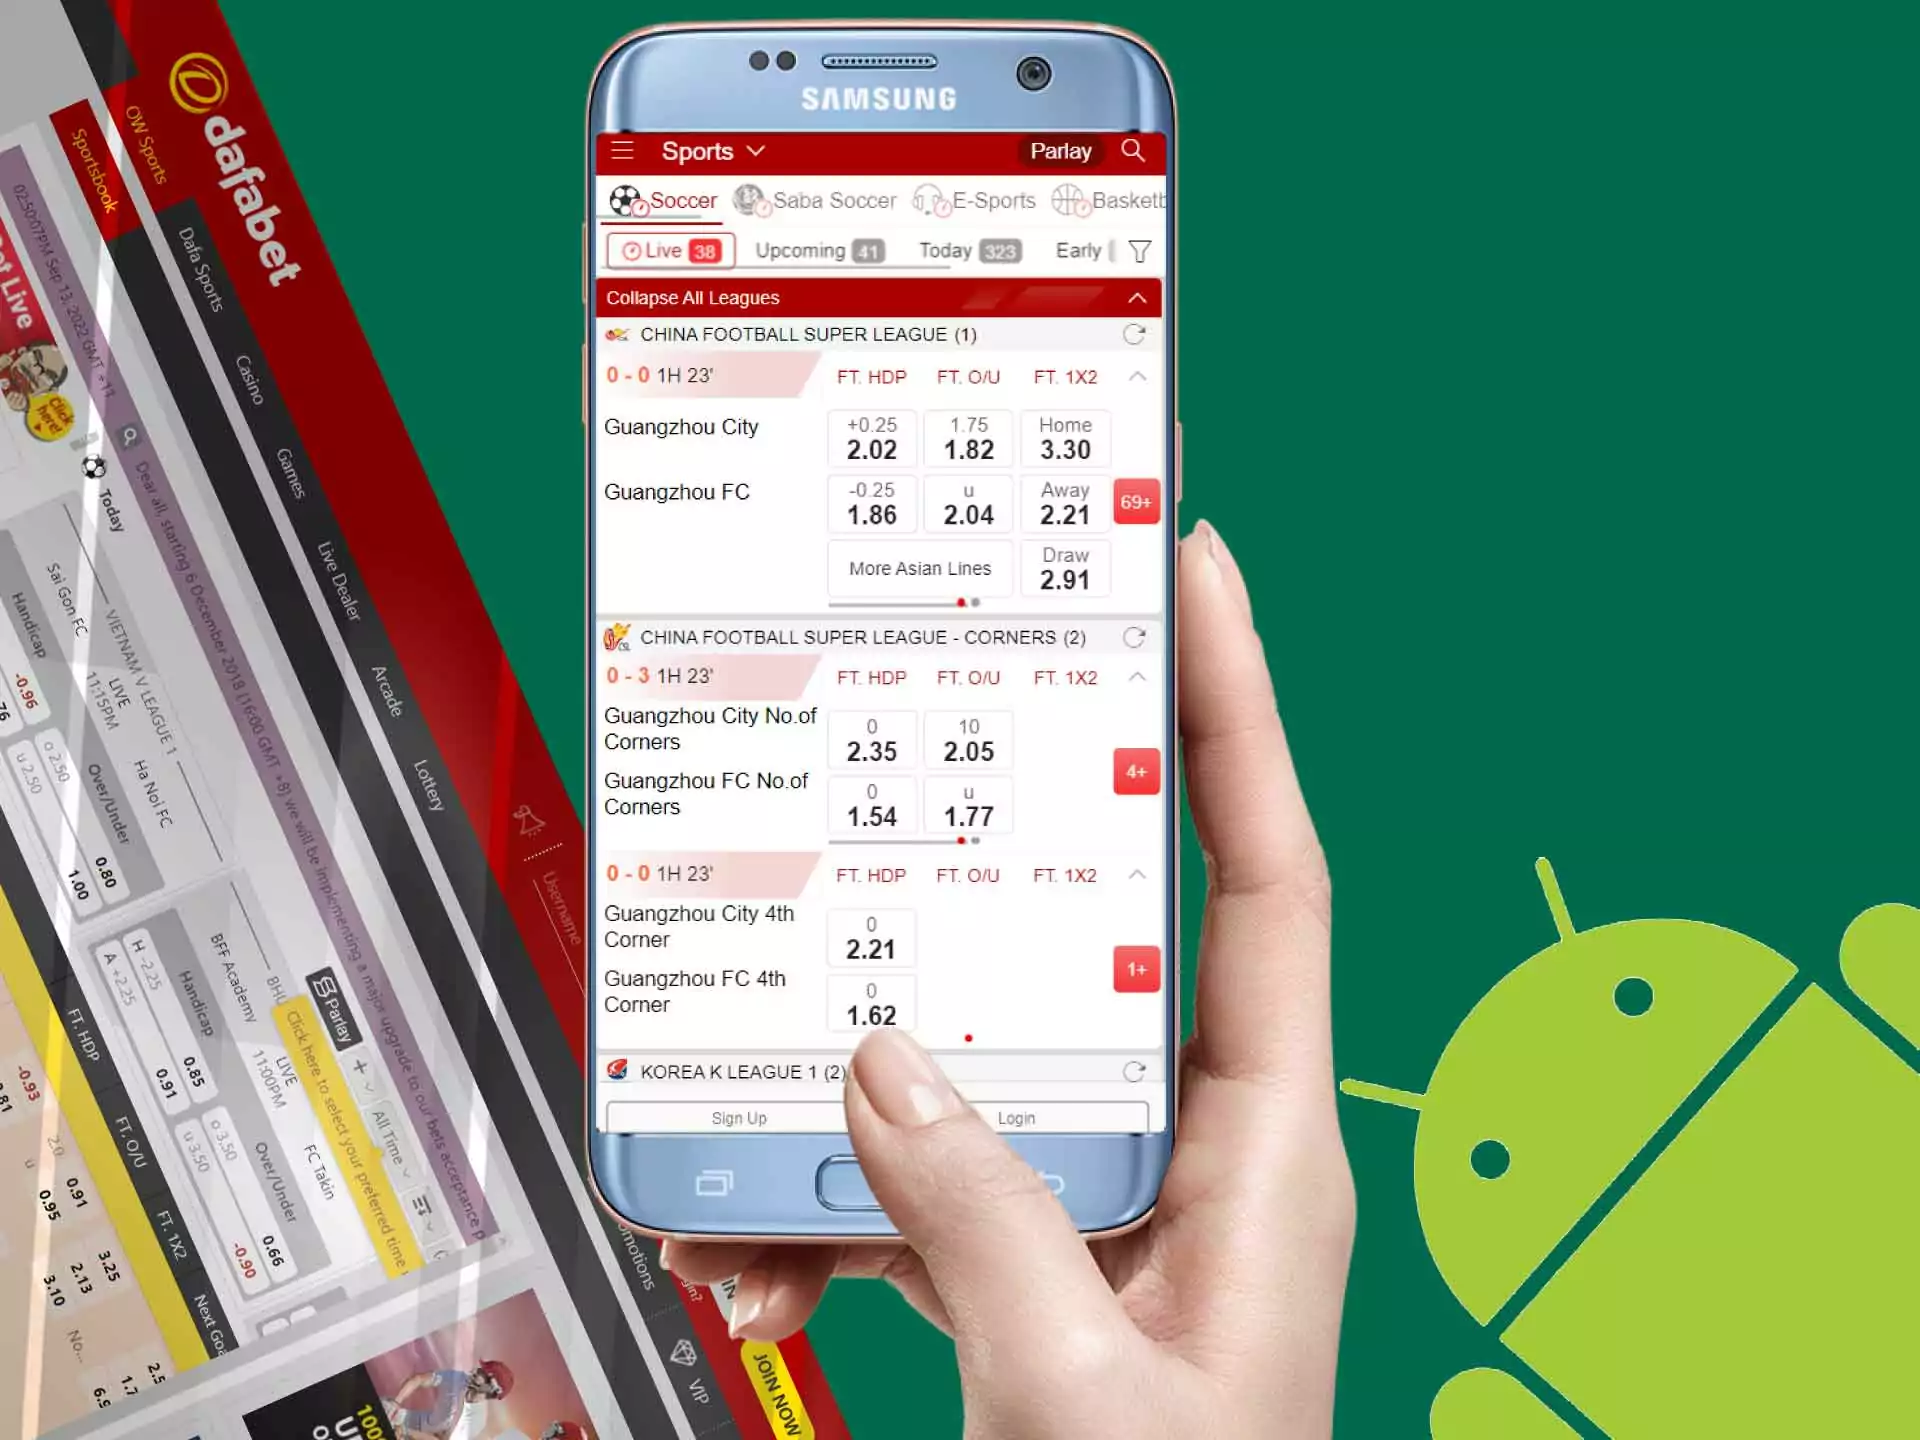 The Dafabet app can operate on any Android devices.